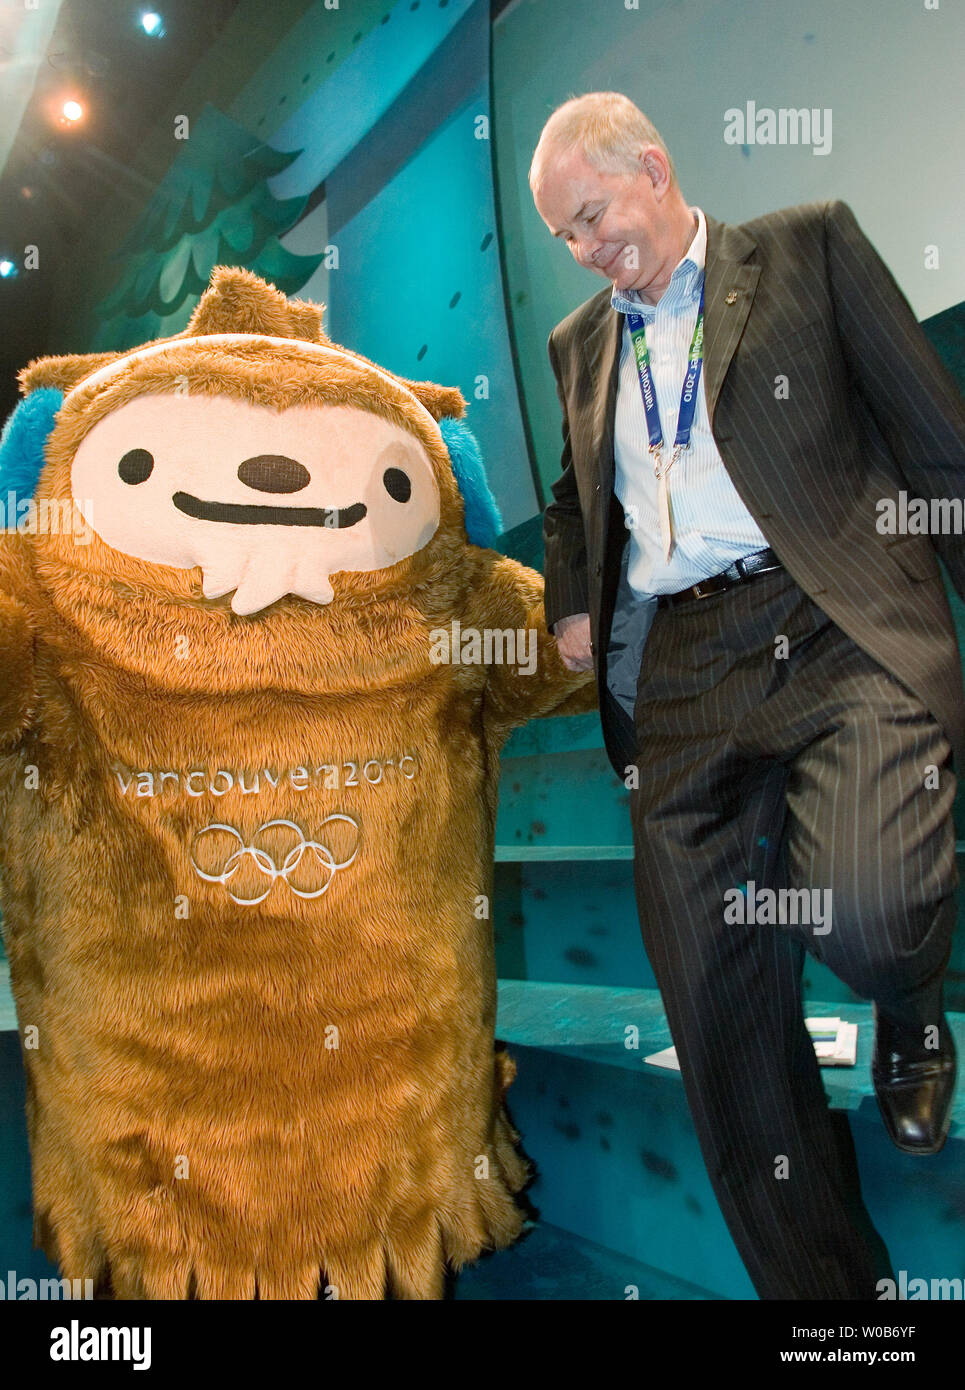 VANOC CEO John Furlong helps Quatchi down some steps onstage at the unveiling of the 2010 Winter Olympic Mascots Miga, Quatchi and Sumi in Surrey near Vancouver, British Columbia, November 27, 2007. Miga is a sea bear which according to First Nations legend is an orca whale which can turn into the rare white Kermode bear only found in British Columbia. Quatchi is a sasquatch described in many West Coast First Nations stories but rarely seen. Sumi is an animal gaurdian spirit who wears the hat of an orca, has the strong leags of the black bear and flies with the wings of the great thunderbird. Stock Photo